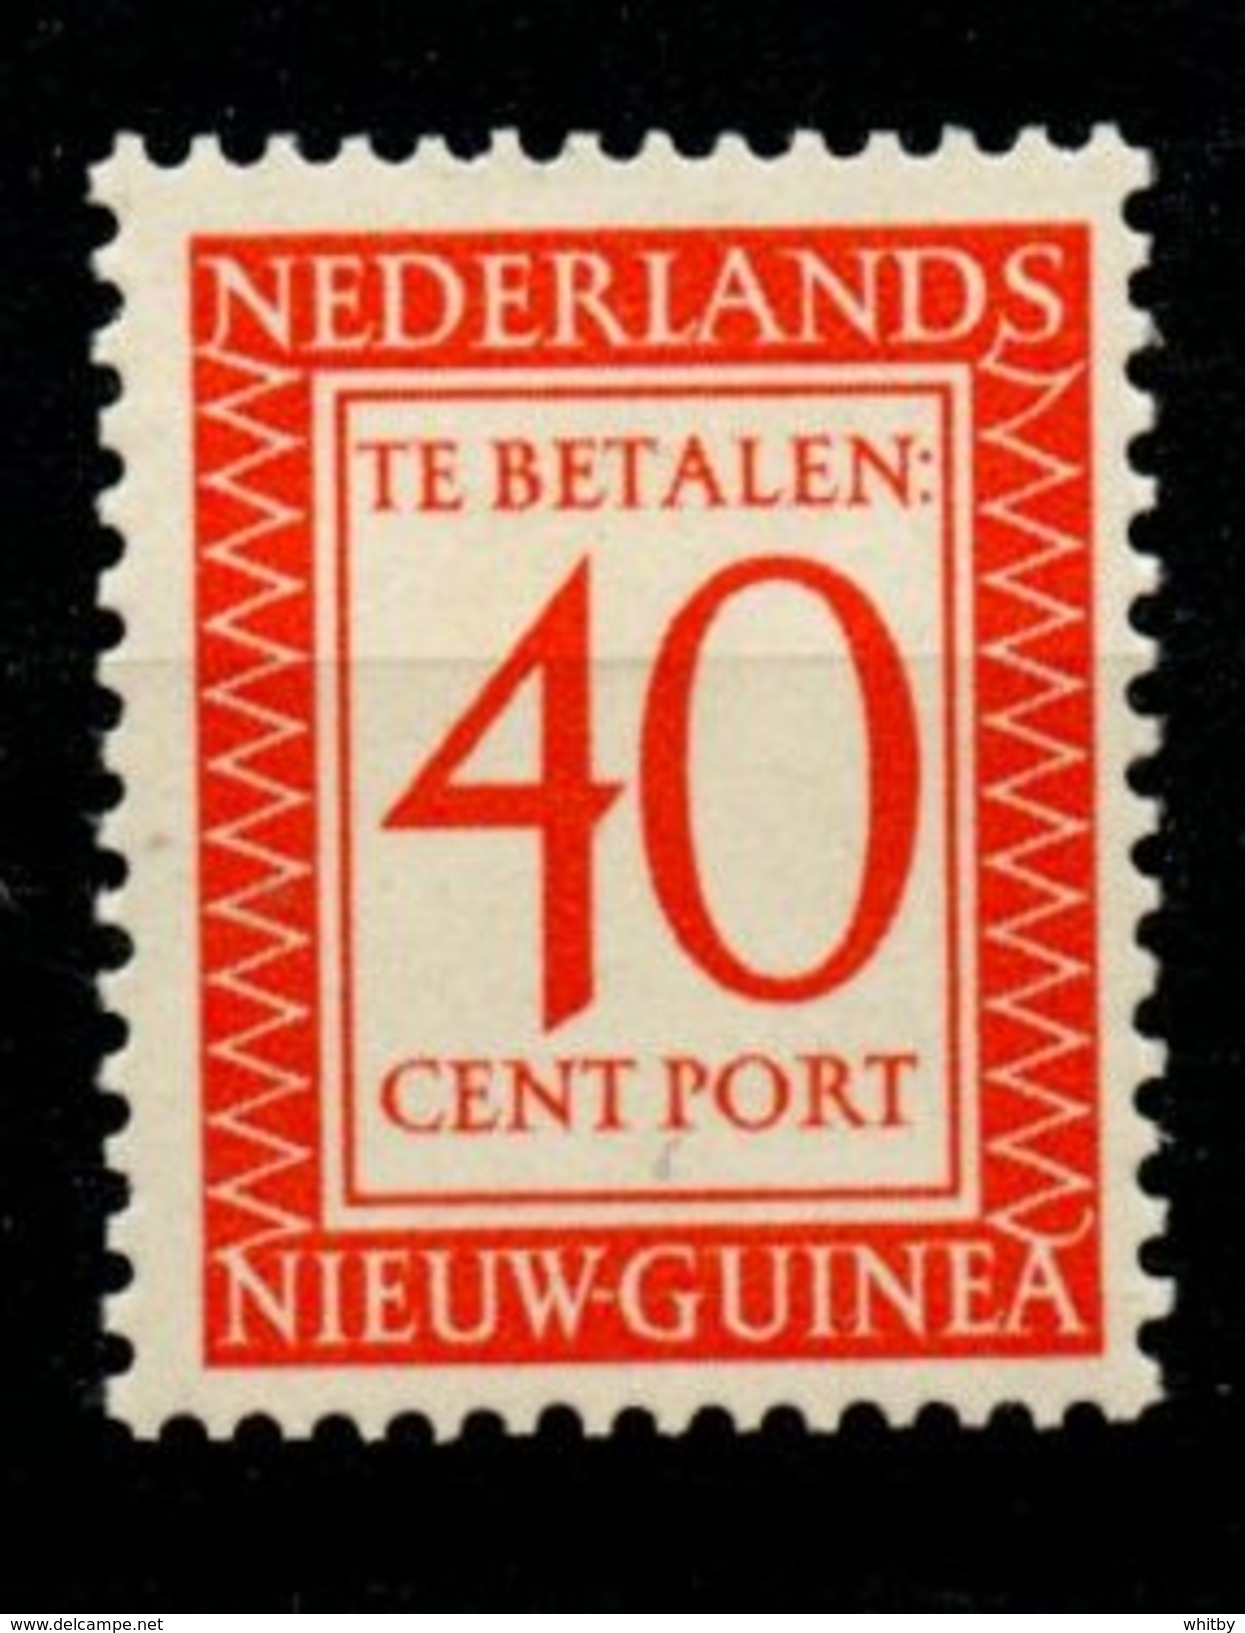 Netherlands New Guinea 1957 40 C Postage Due Issue #J5 MH - Netherlands New Guinea